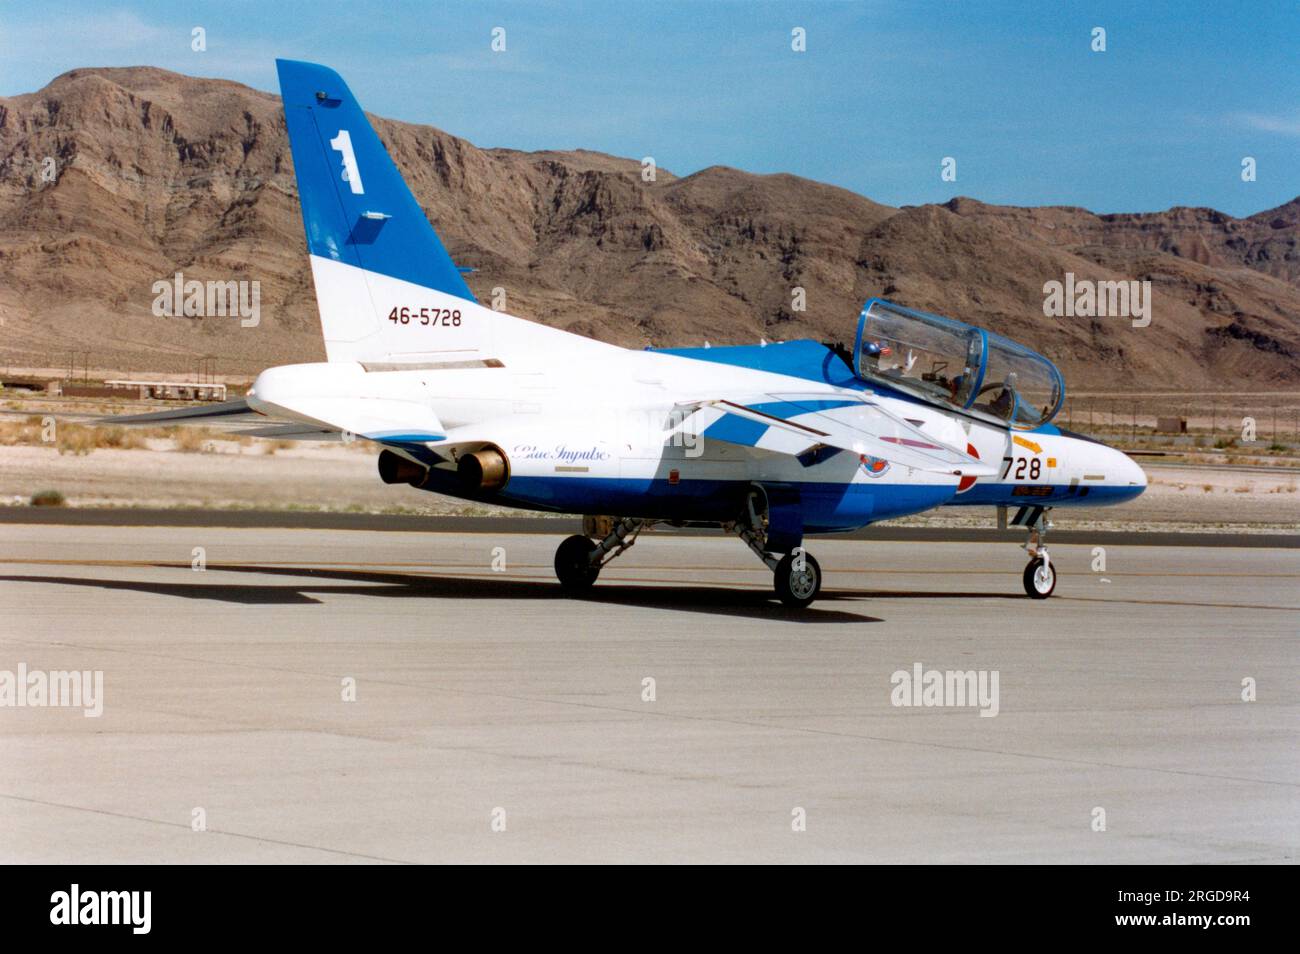 Japan Air Self Defence Force - Kawasaki T-4 46-5728 / number 1 (msn 1128), of the Blue Impulse aerobatic display team, at the Nellis Air Force Base '50th Anniversary of the USAF' airshow on 26 April 1997. Stock Photo